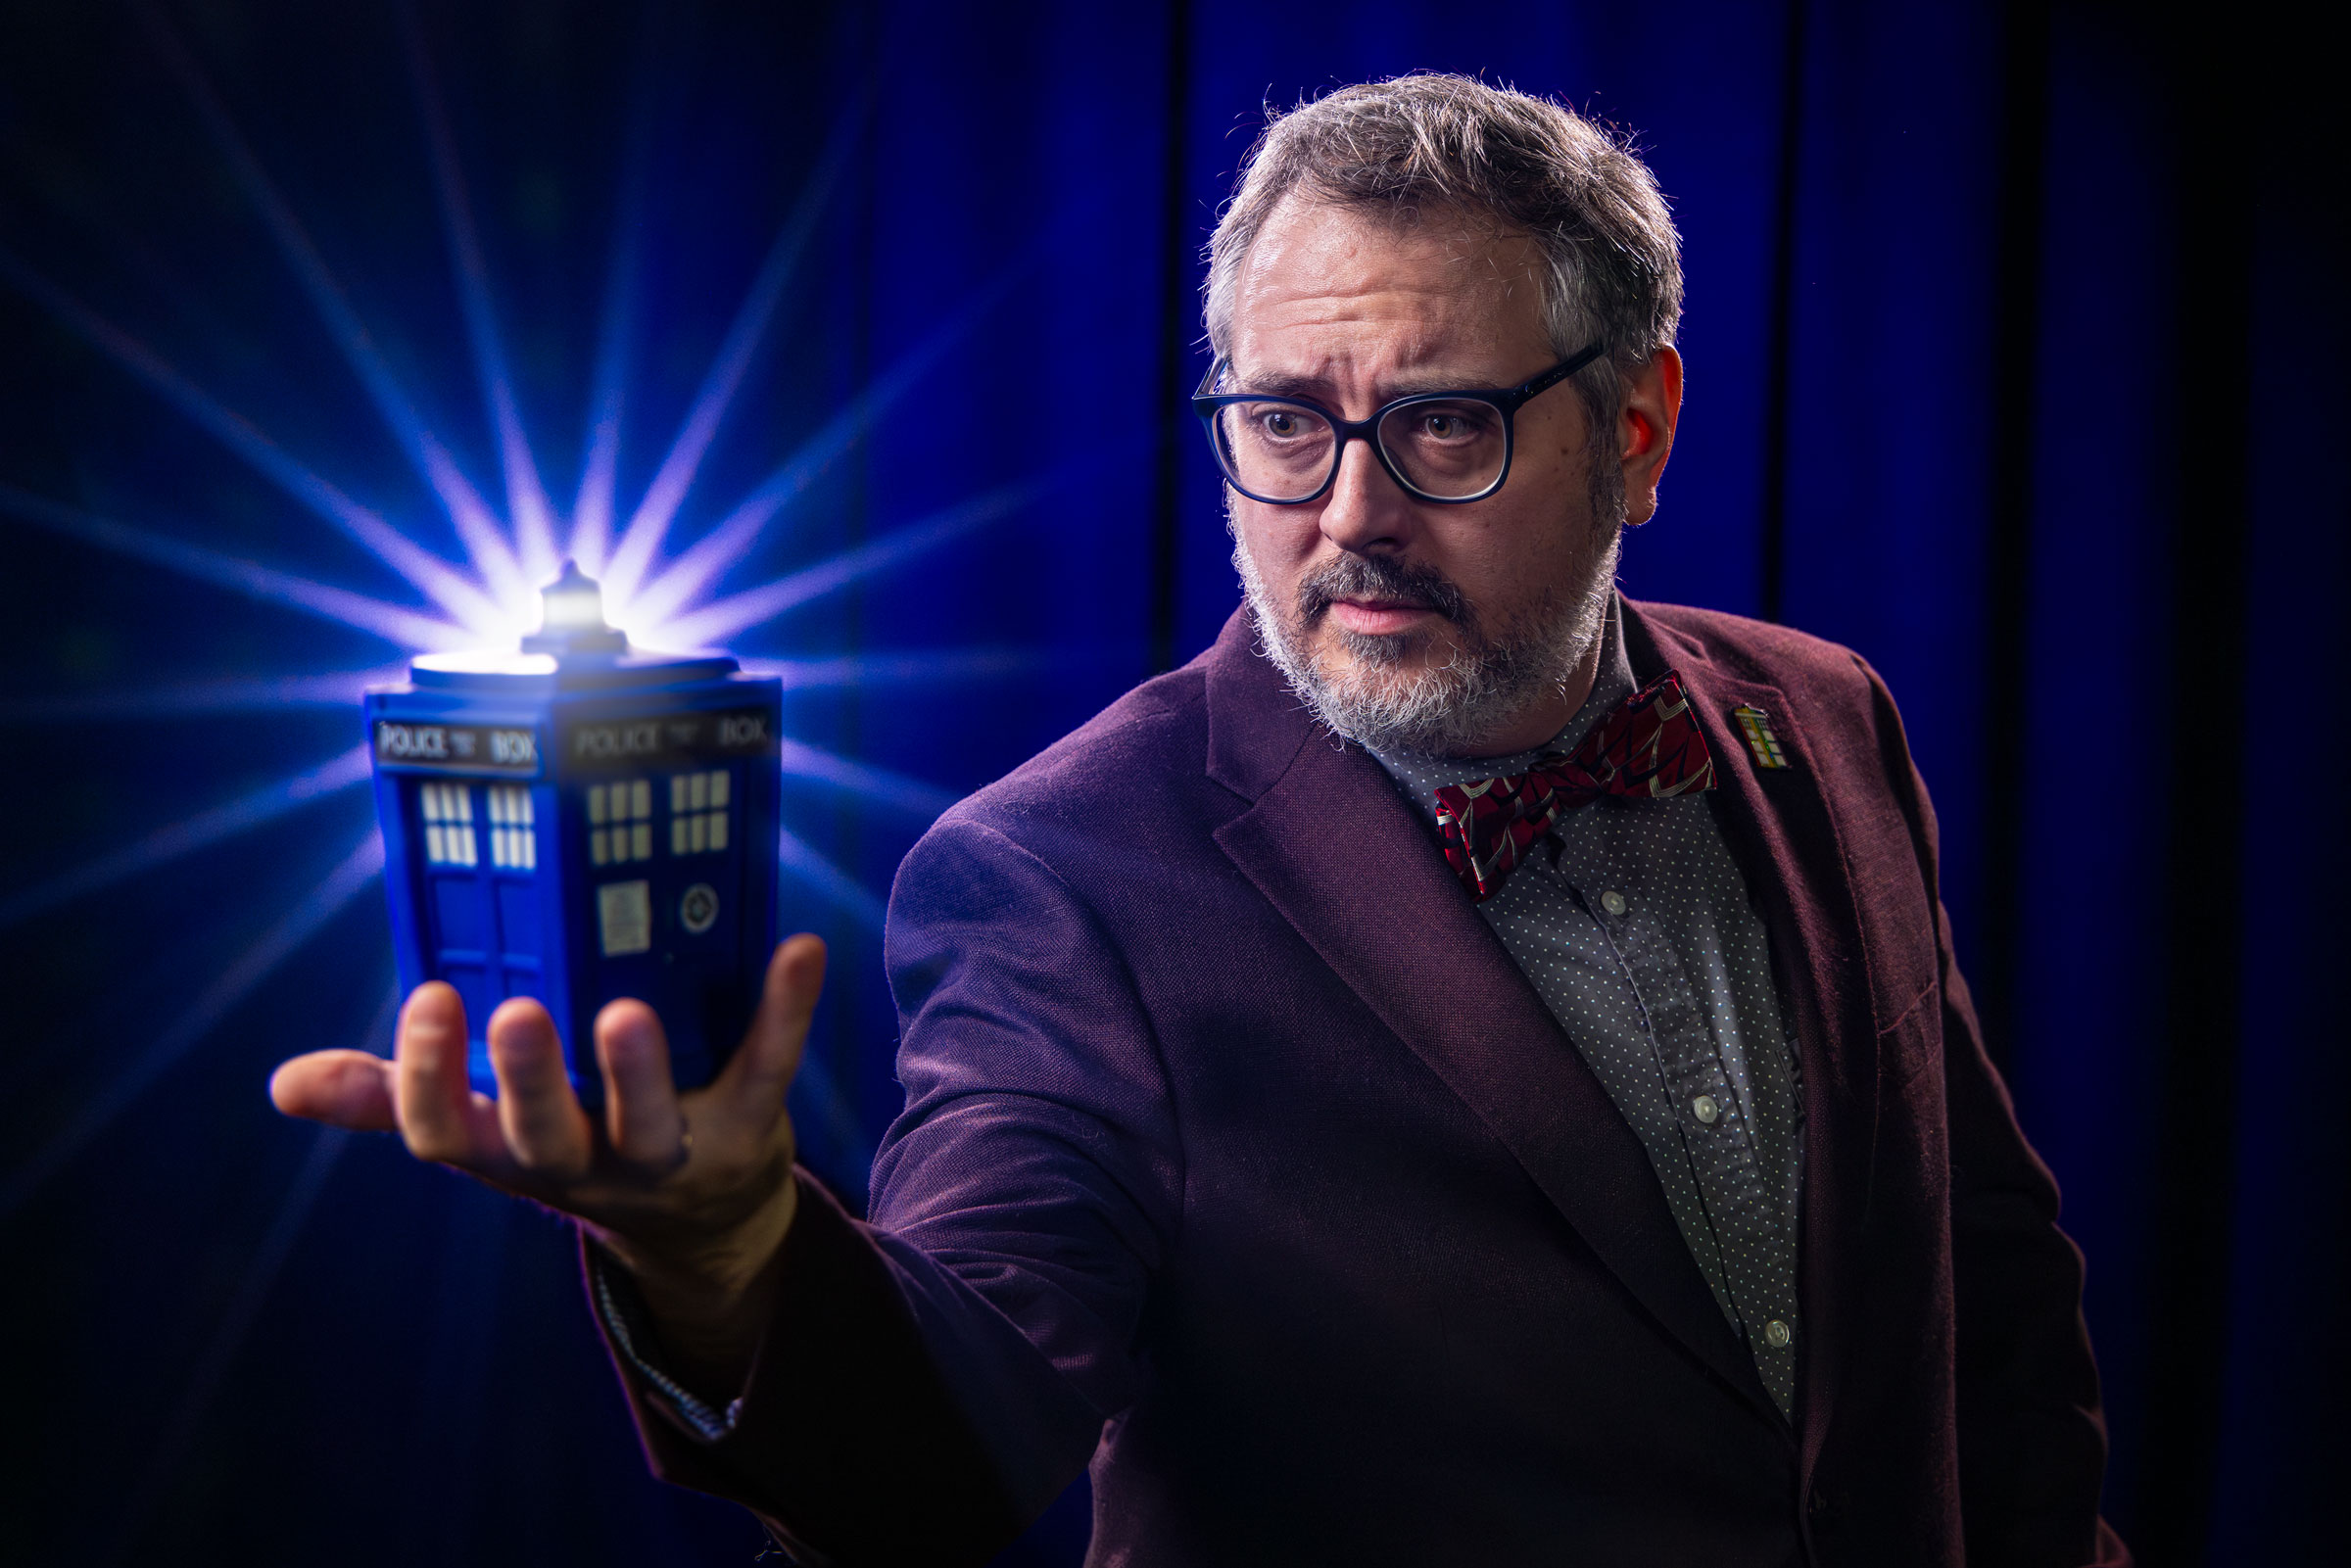 Paul Booth in a suit with a Tardis pin holding a little glowing tardis 